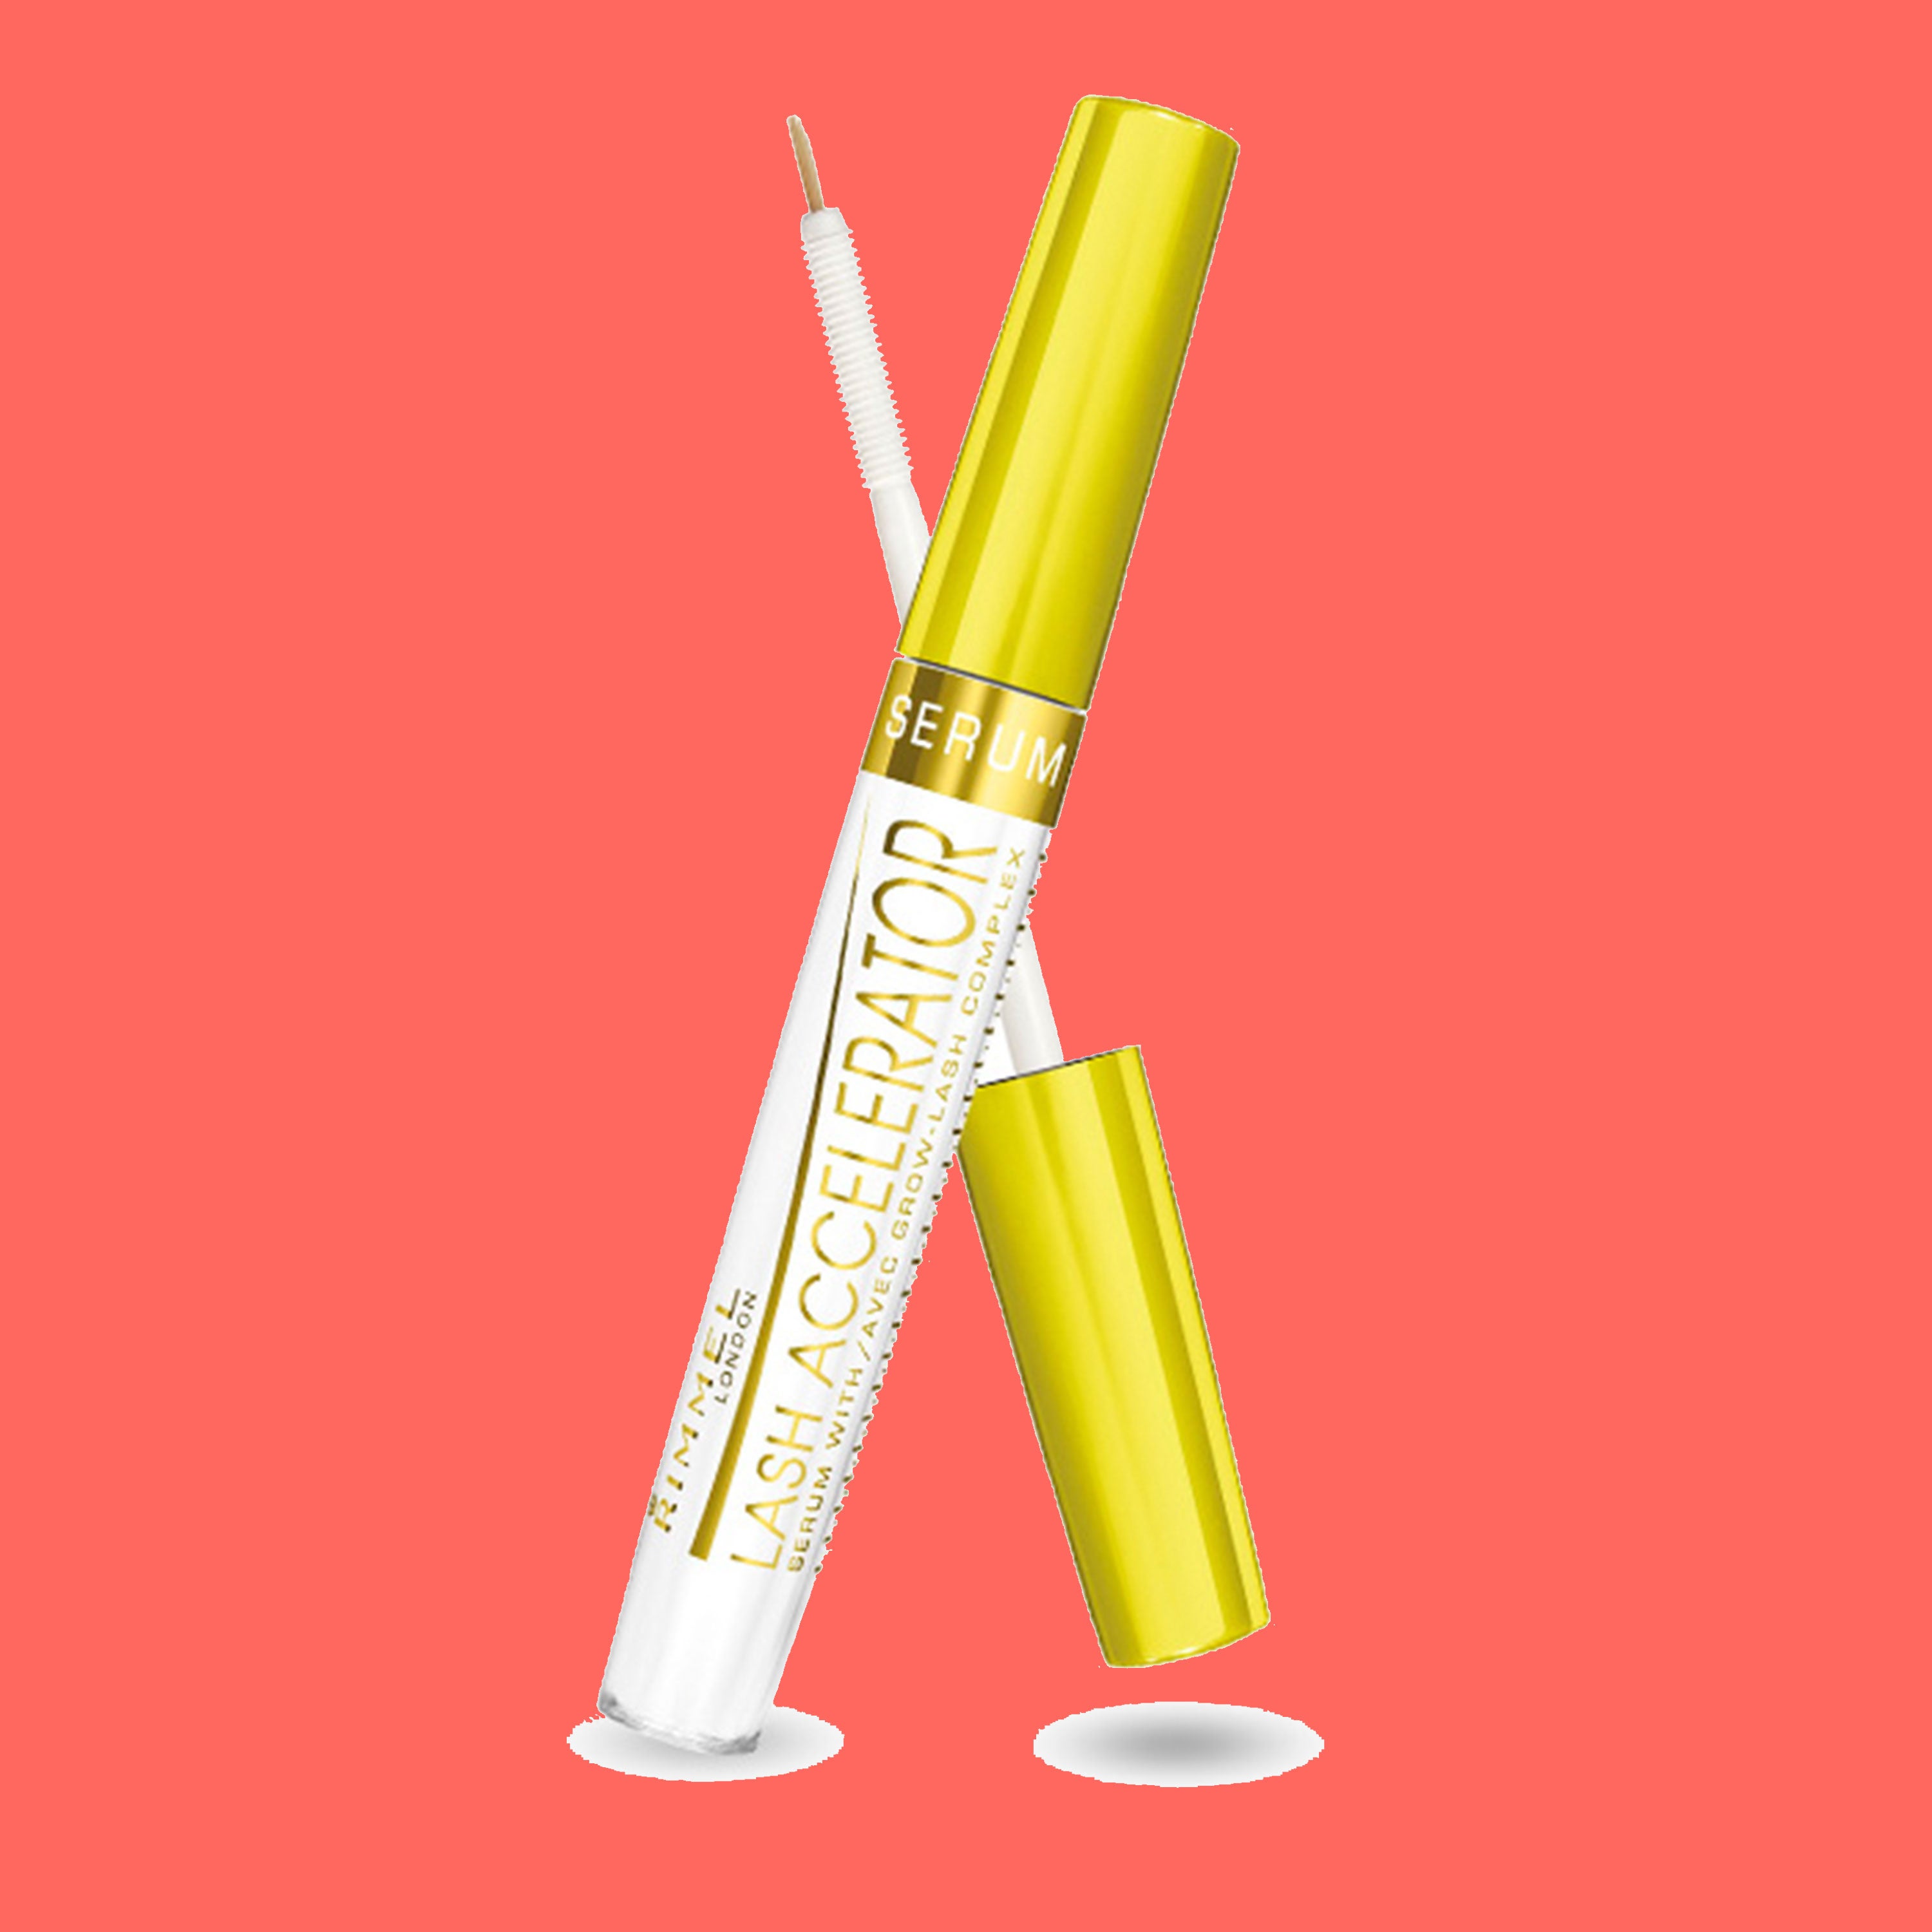 10 Growth Serums To Try For Fuller and Longer Lashes